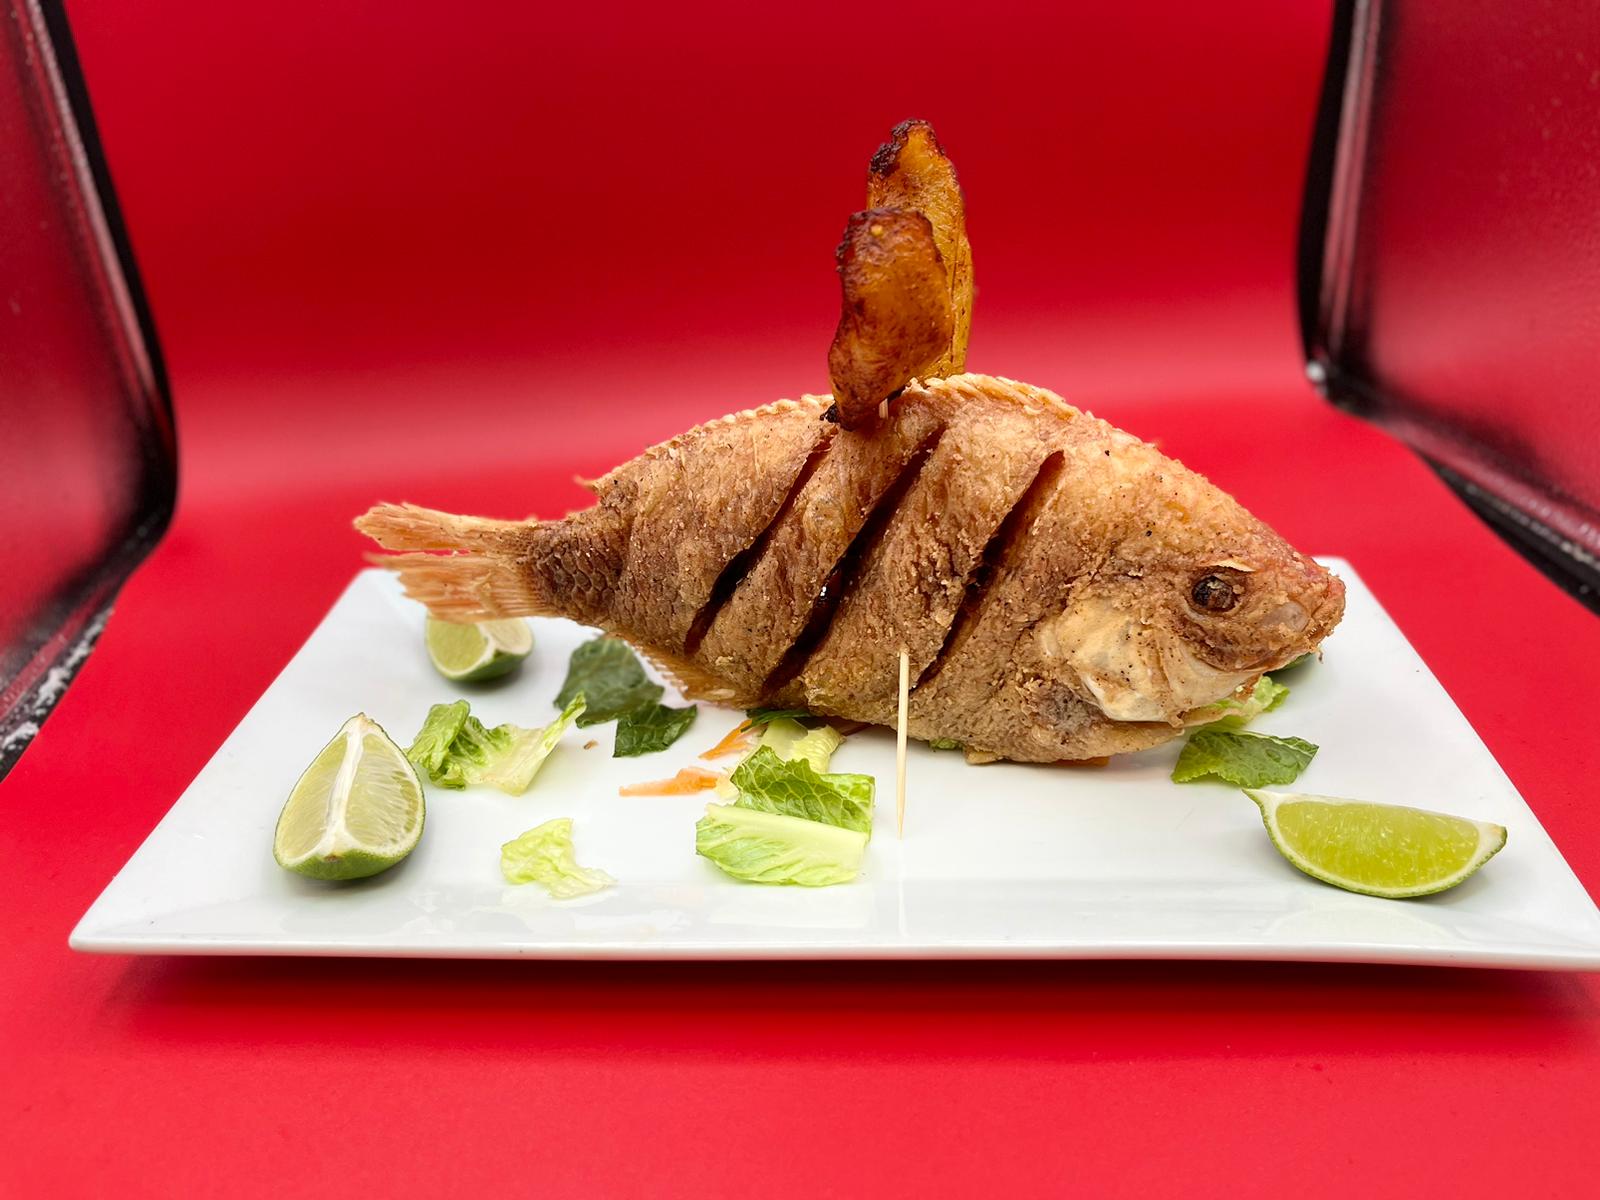 A fried fish on a plate with lime wedges.